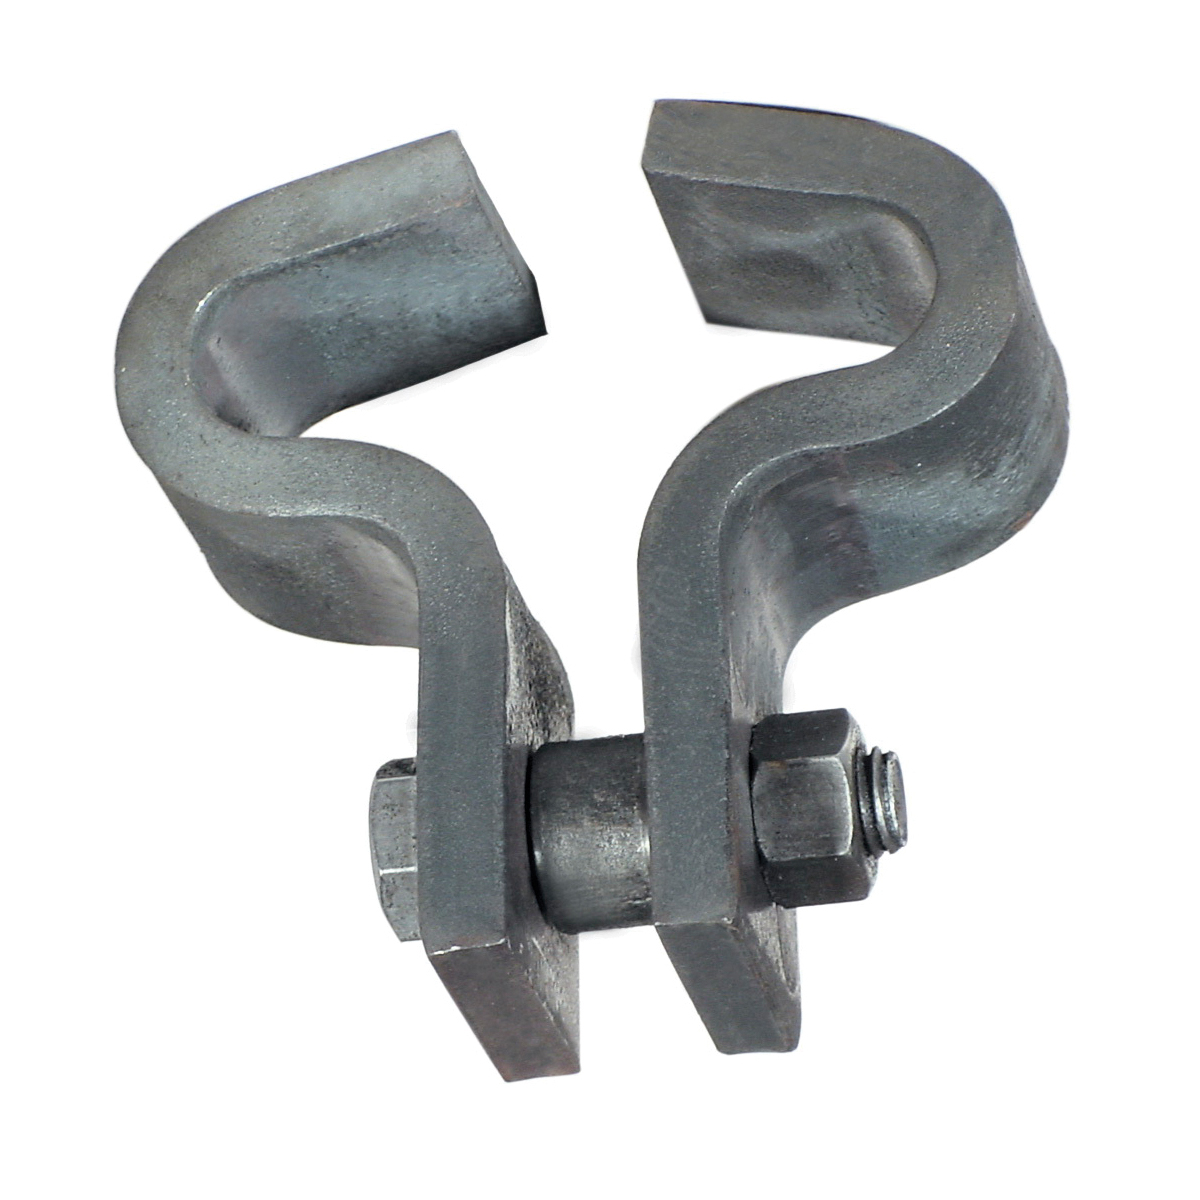 Anvil® 0500315114 FIG 134 Heavy Duty Beam Clamp, 5/8 in THK Flange, 3000 lb Load, Carbon Steel, Galvanized